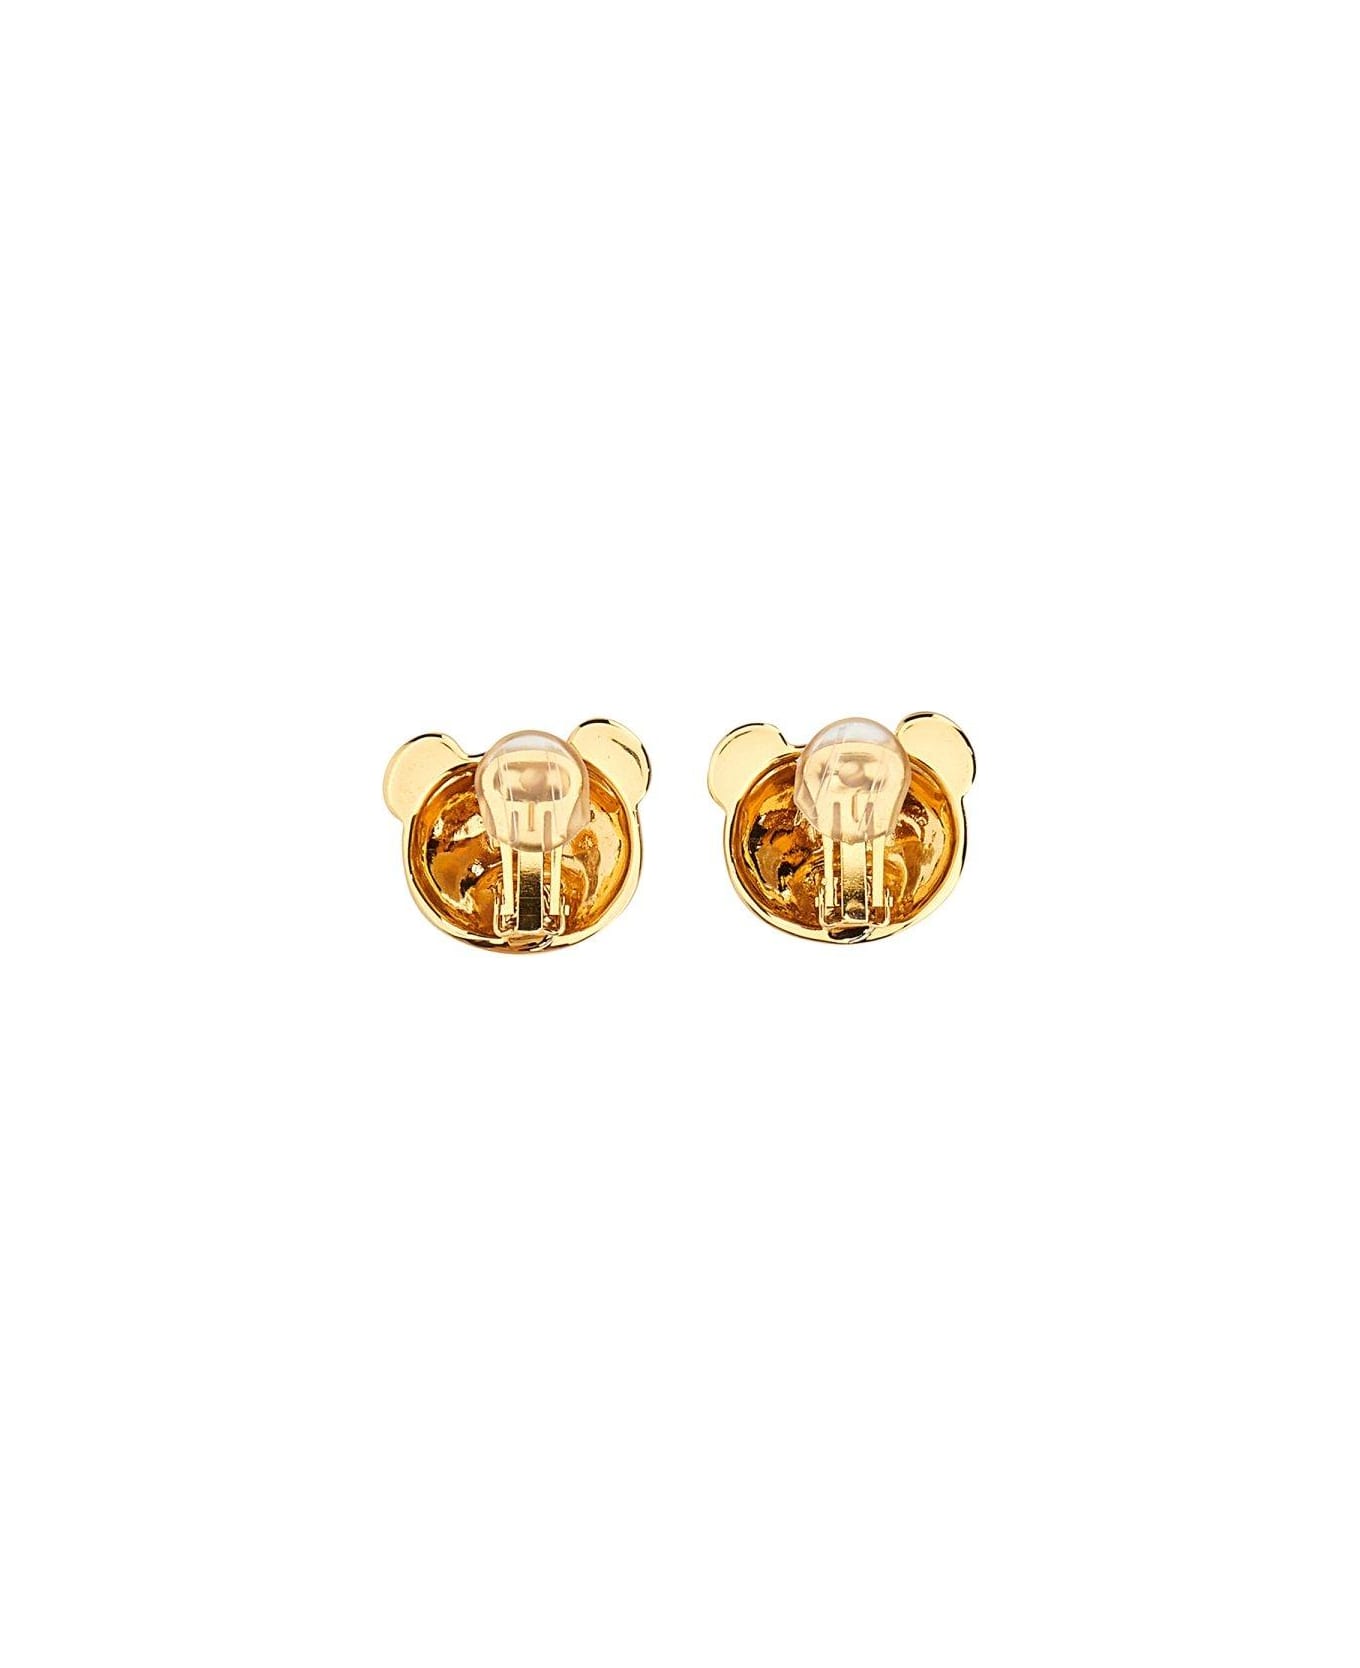 Moschino Teddy Bear Engraved Clip-on Earrings - GOLD